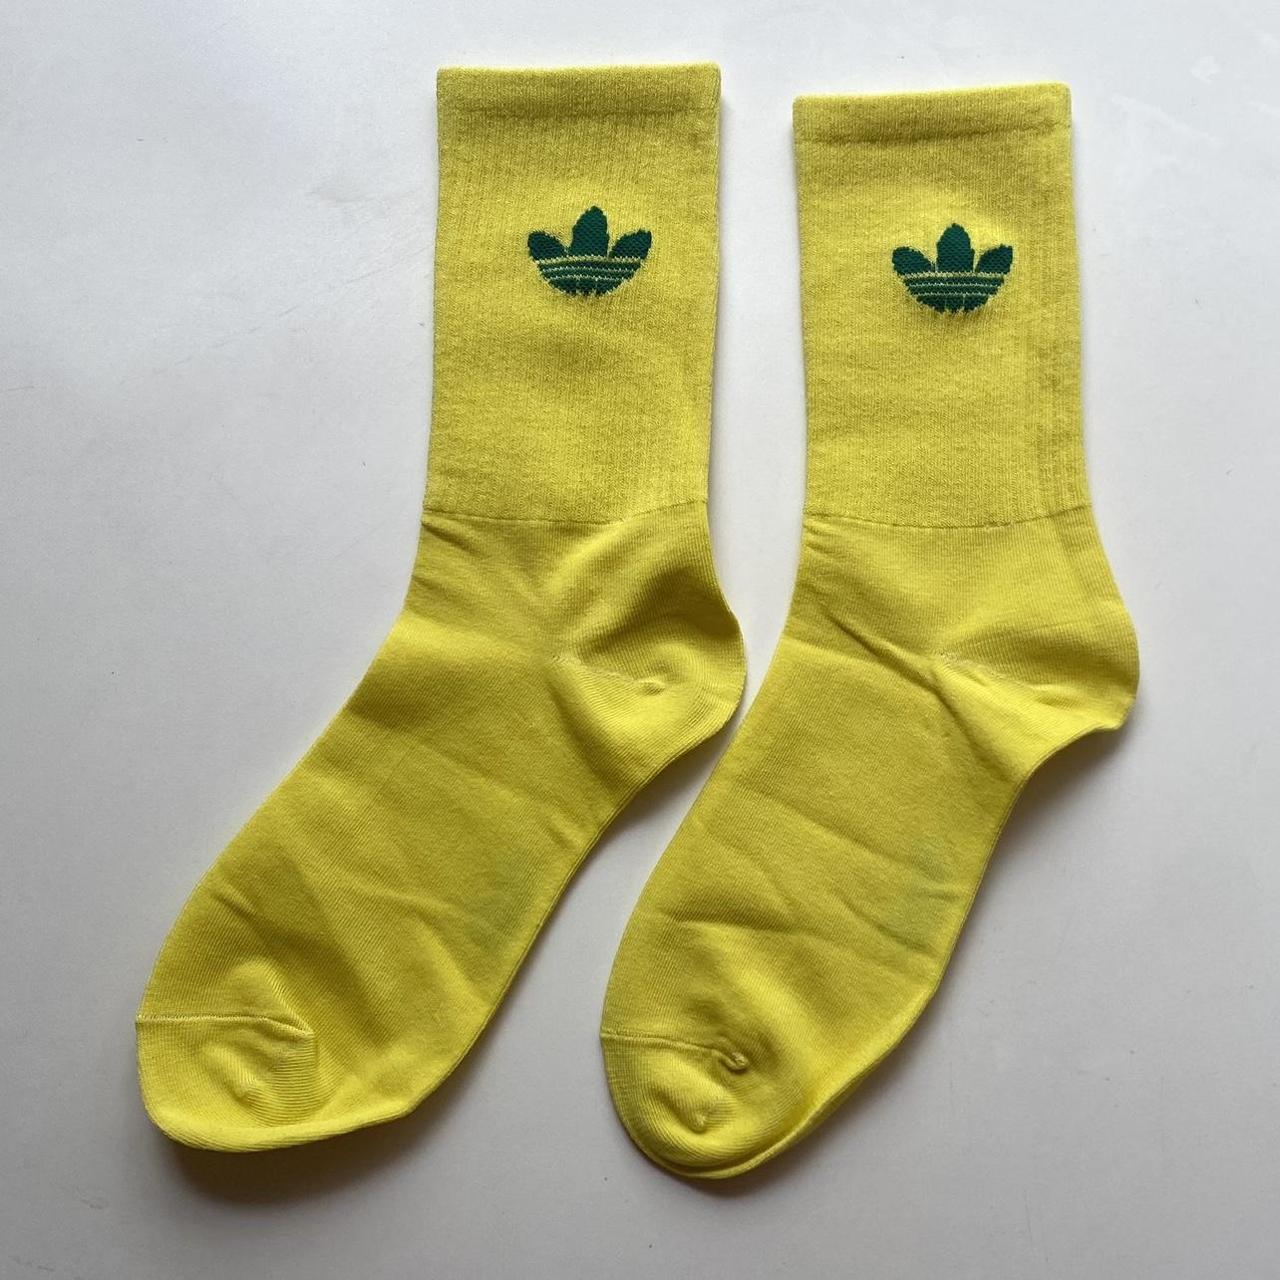 Brand new, Adidas socks. all cotton Great value，one... - Depop